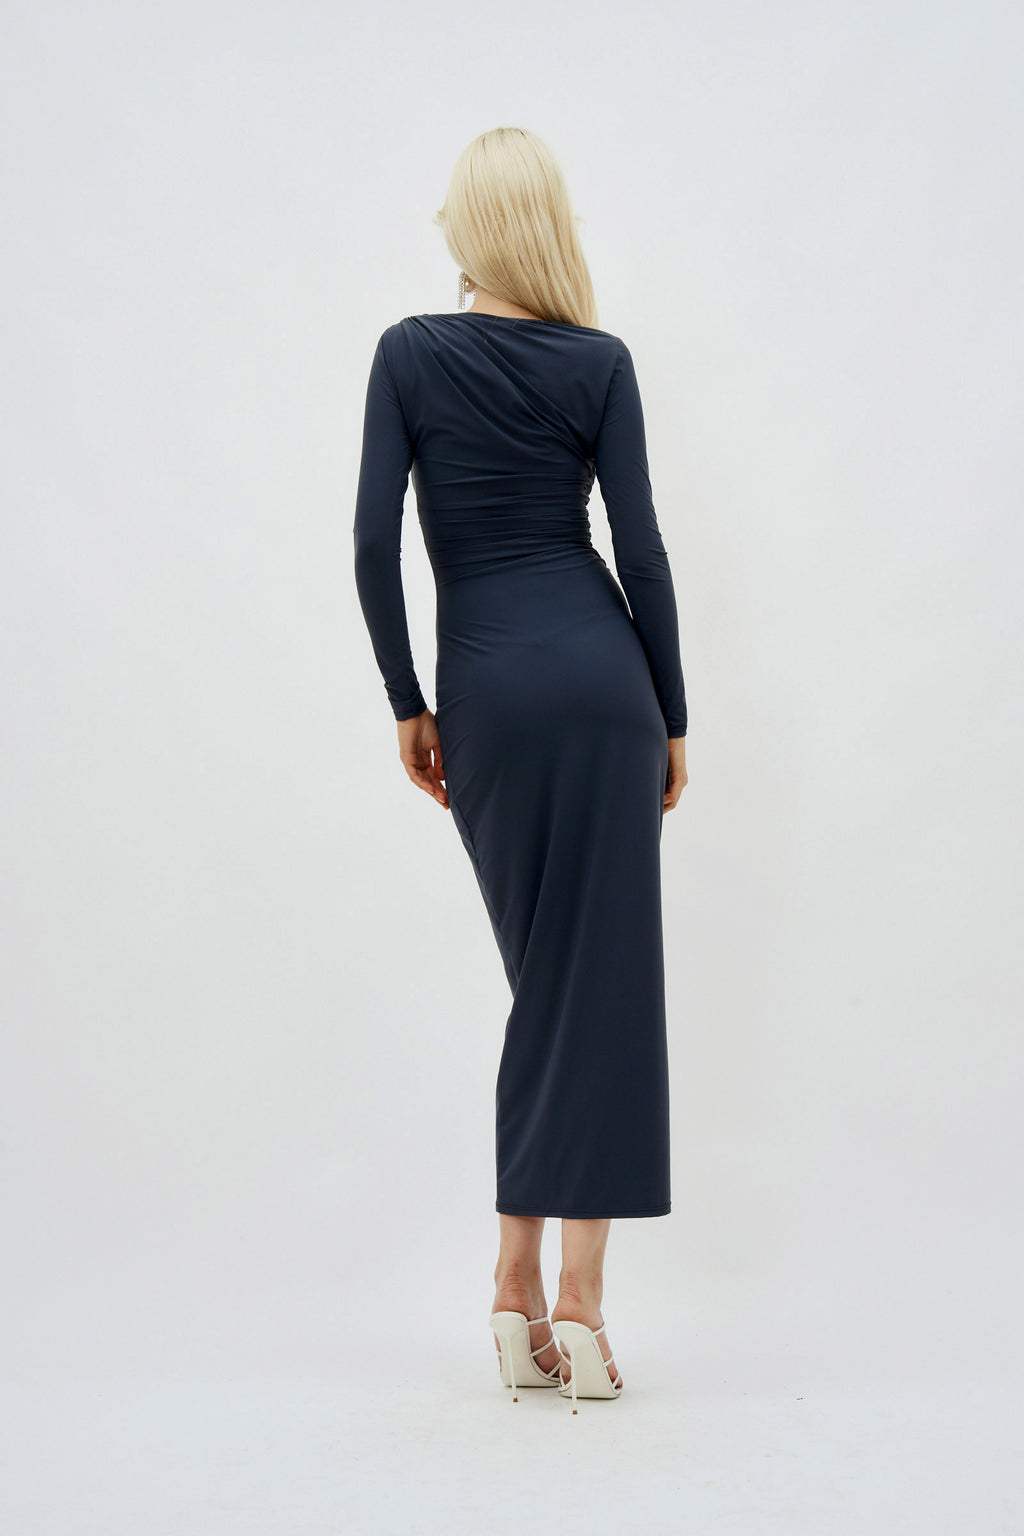 Long Sleeve Ruched Bodycon Anthracite Dress